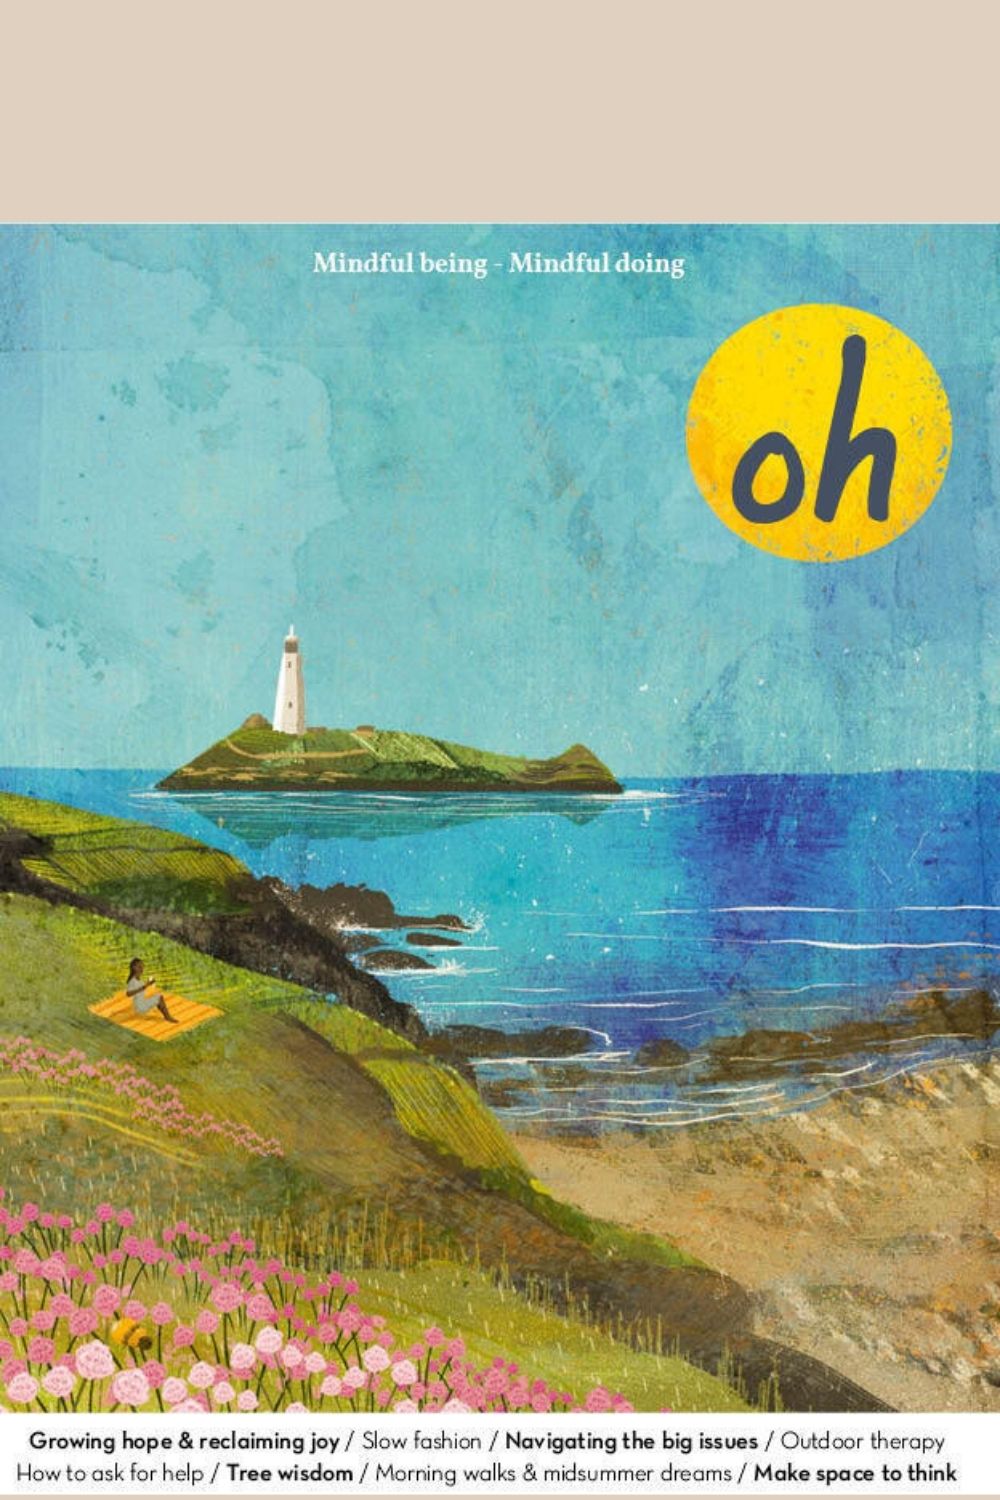 Front cover of Issue 60 of Oh magazine